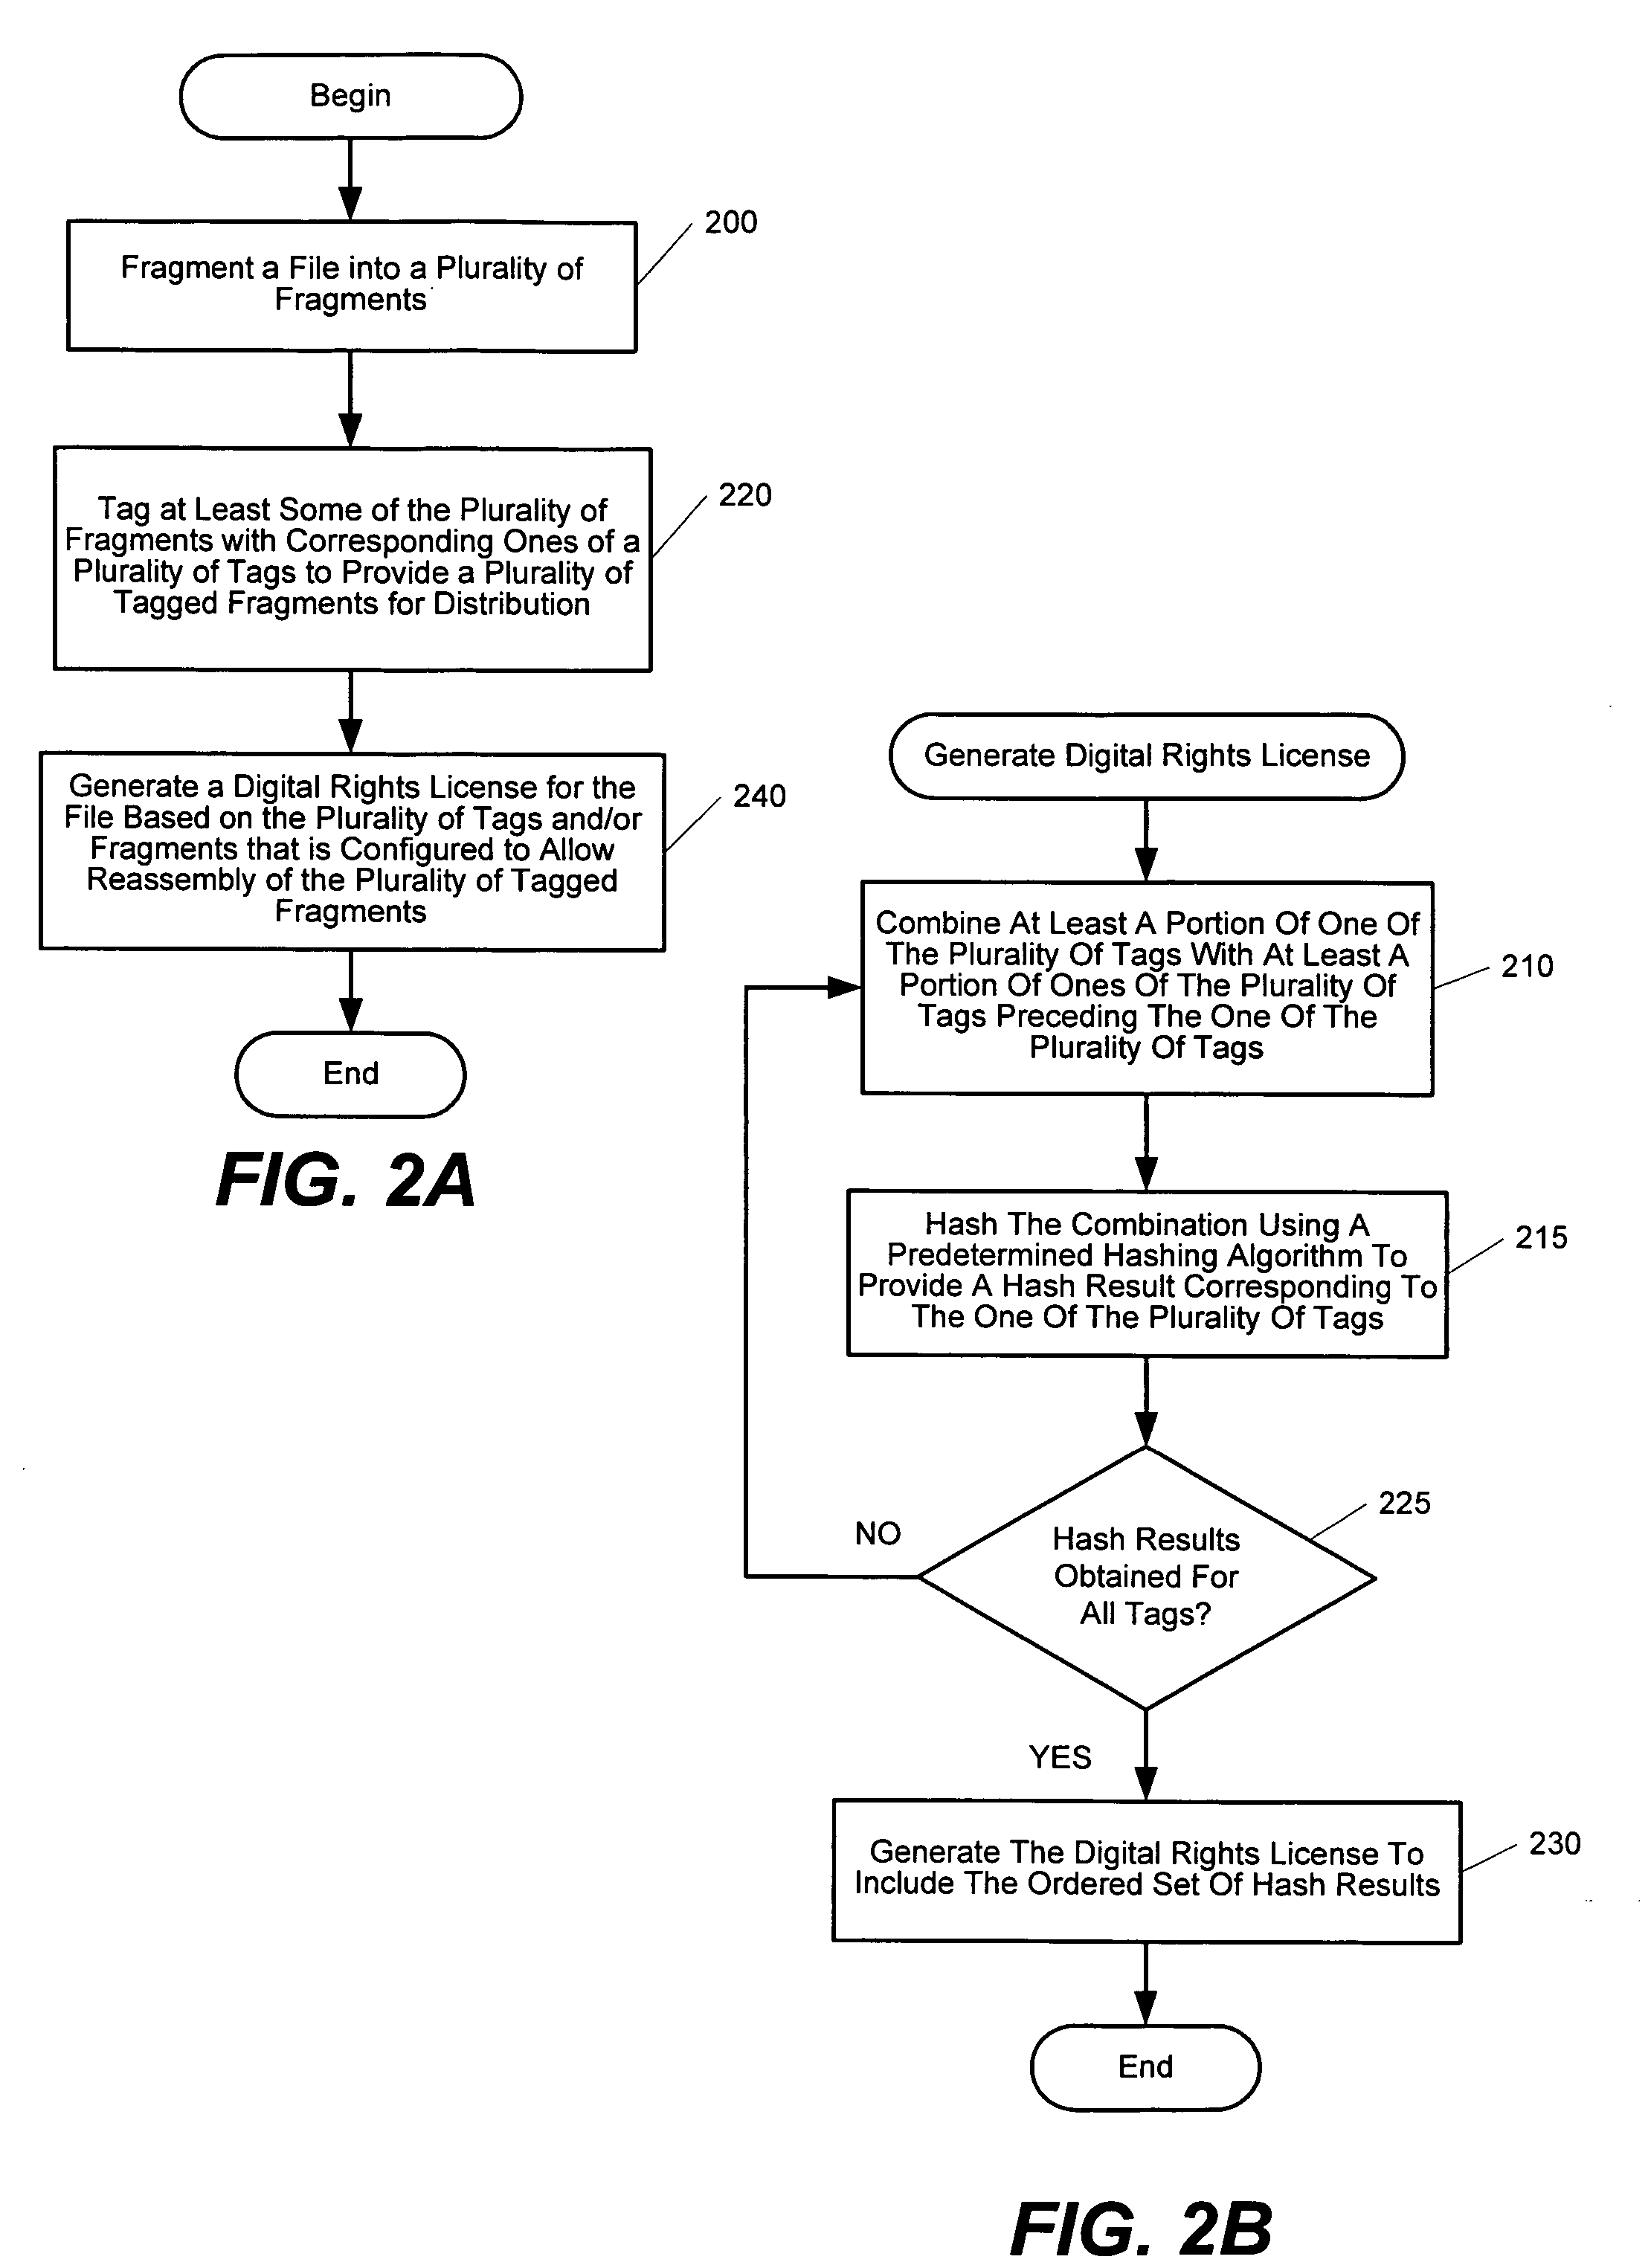 Methods, systems, and computer program products for controlling distribution of digital content in a file sharing system using license-based verification, encoded tagging, and time-limited fragment validity